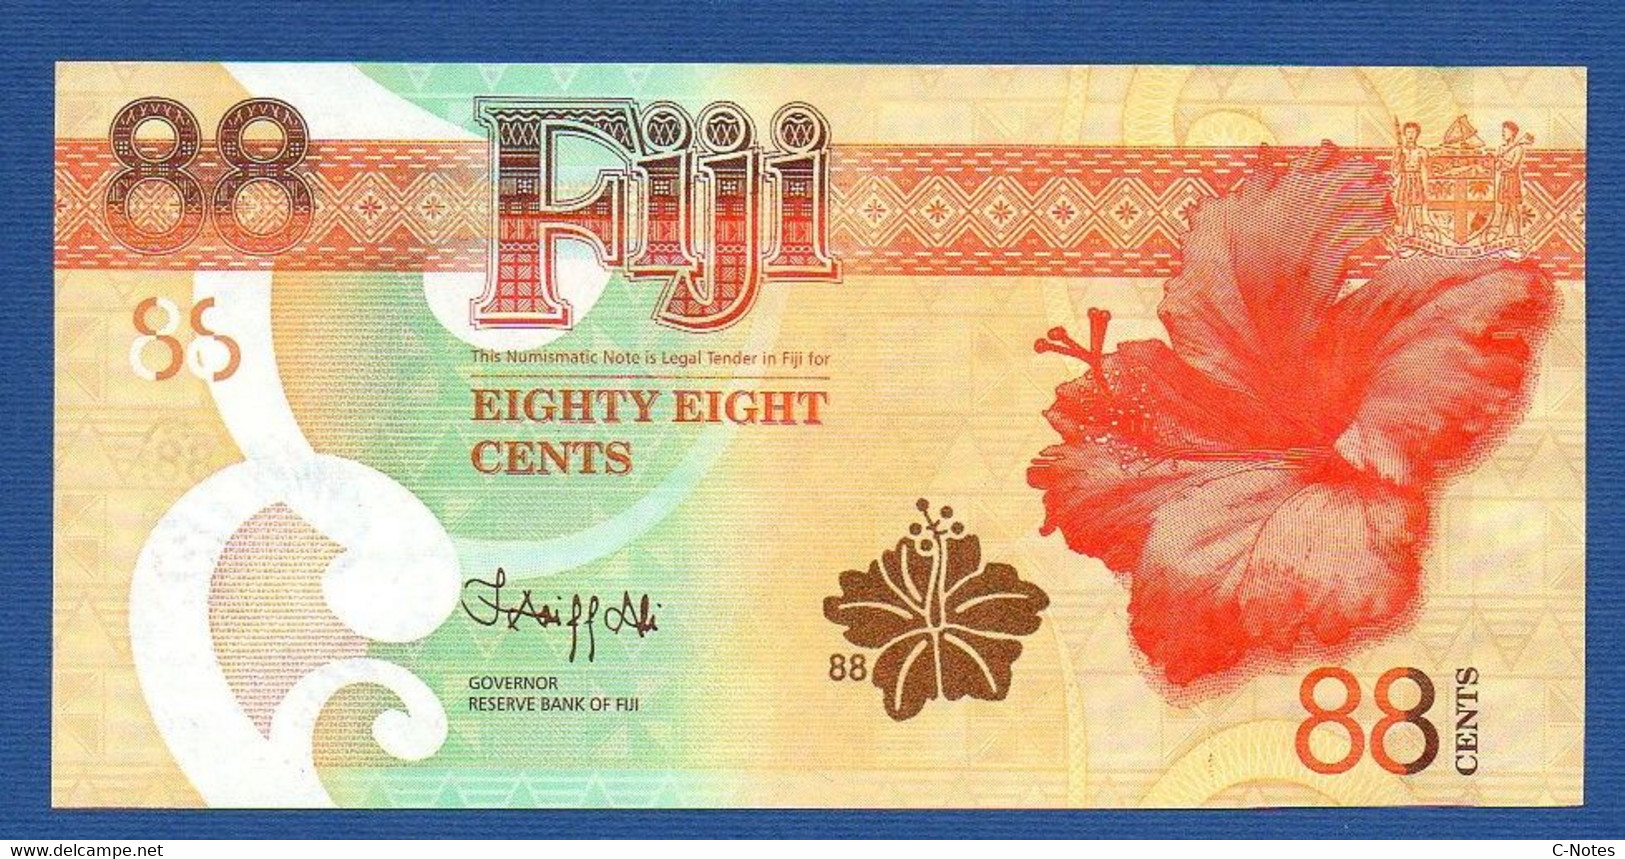 FIJI - P.W123 (1) – 88 Cents  ND (2022) UNC Serie AB19620231 "Numismatic Banknote 88 Cents" Commemorative Issue - Fiji